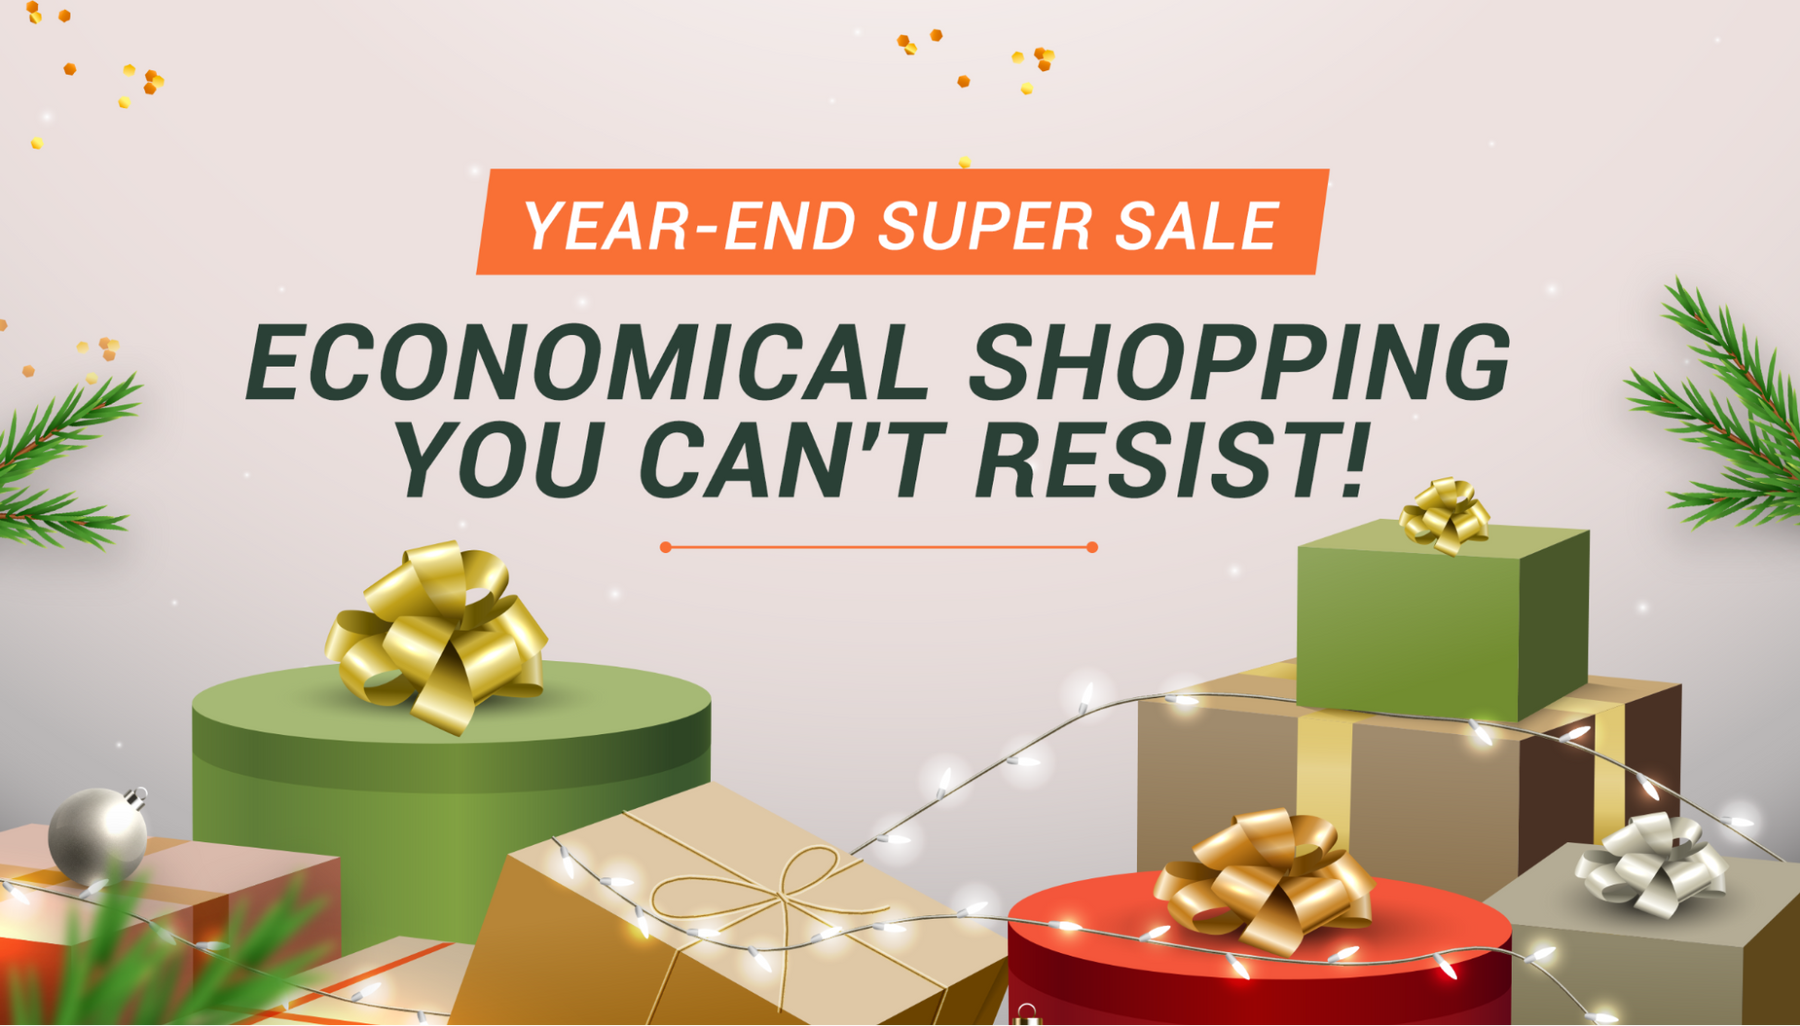 Year-End Super Sale: Economical Shopping You Can't Resist!